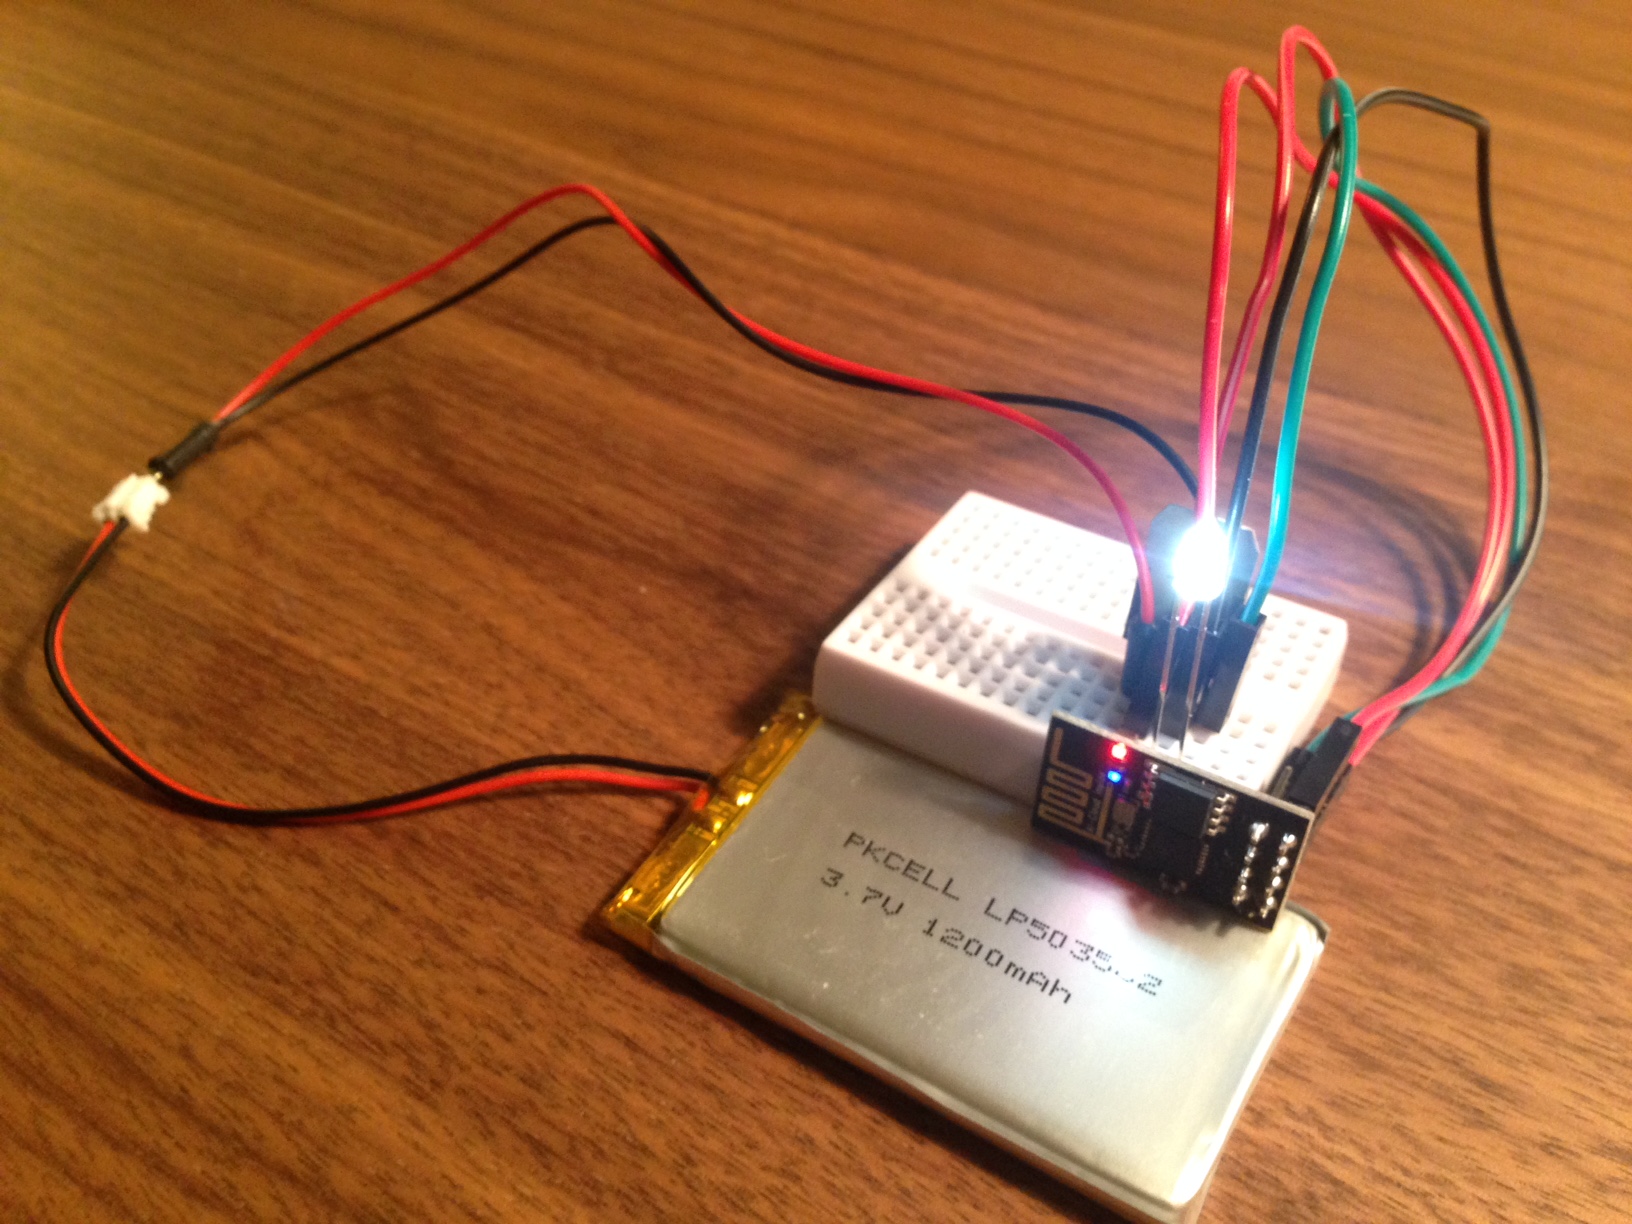 Wifi Connected LED using Guide.js